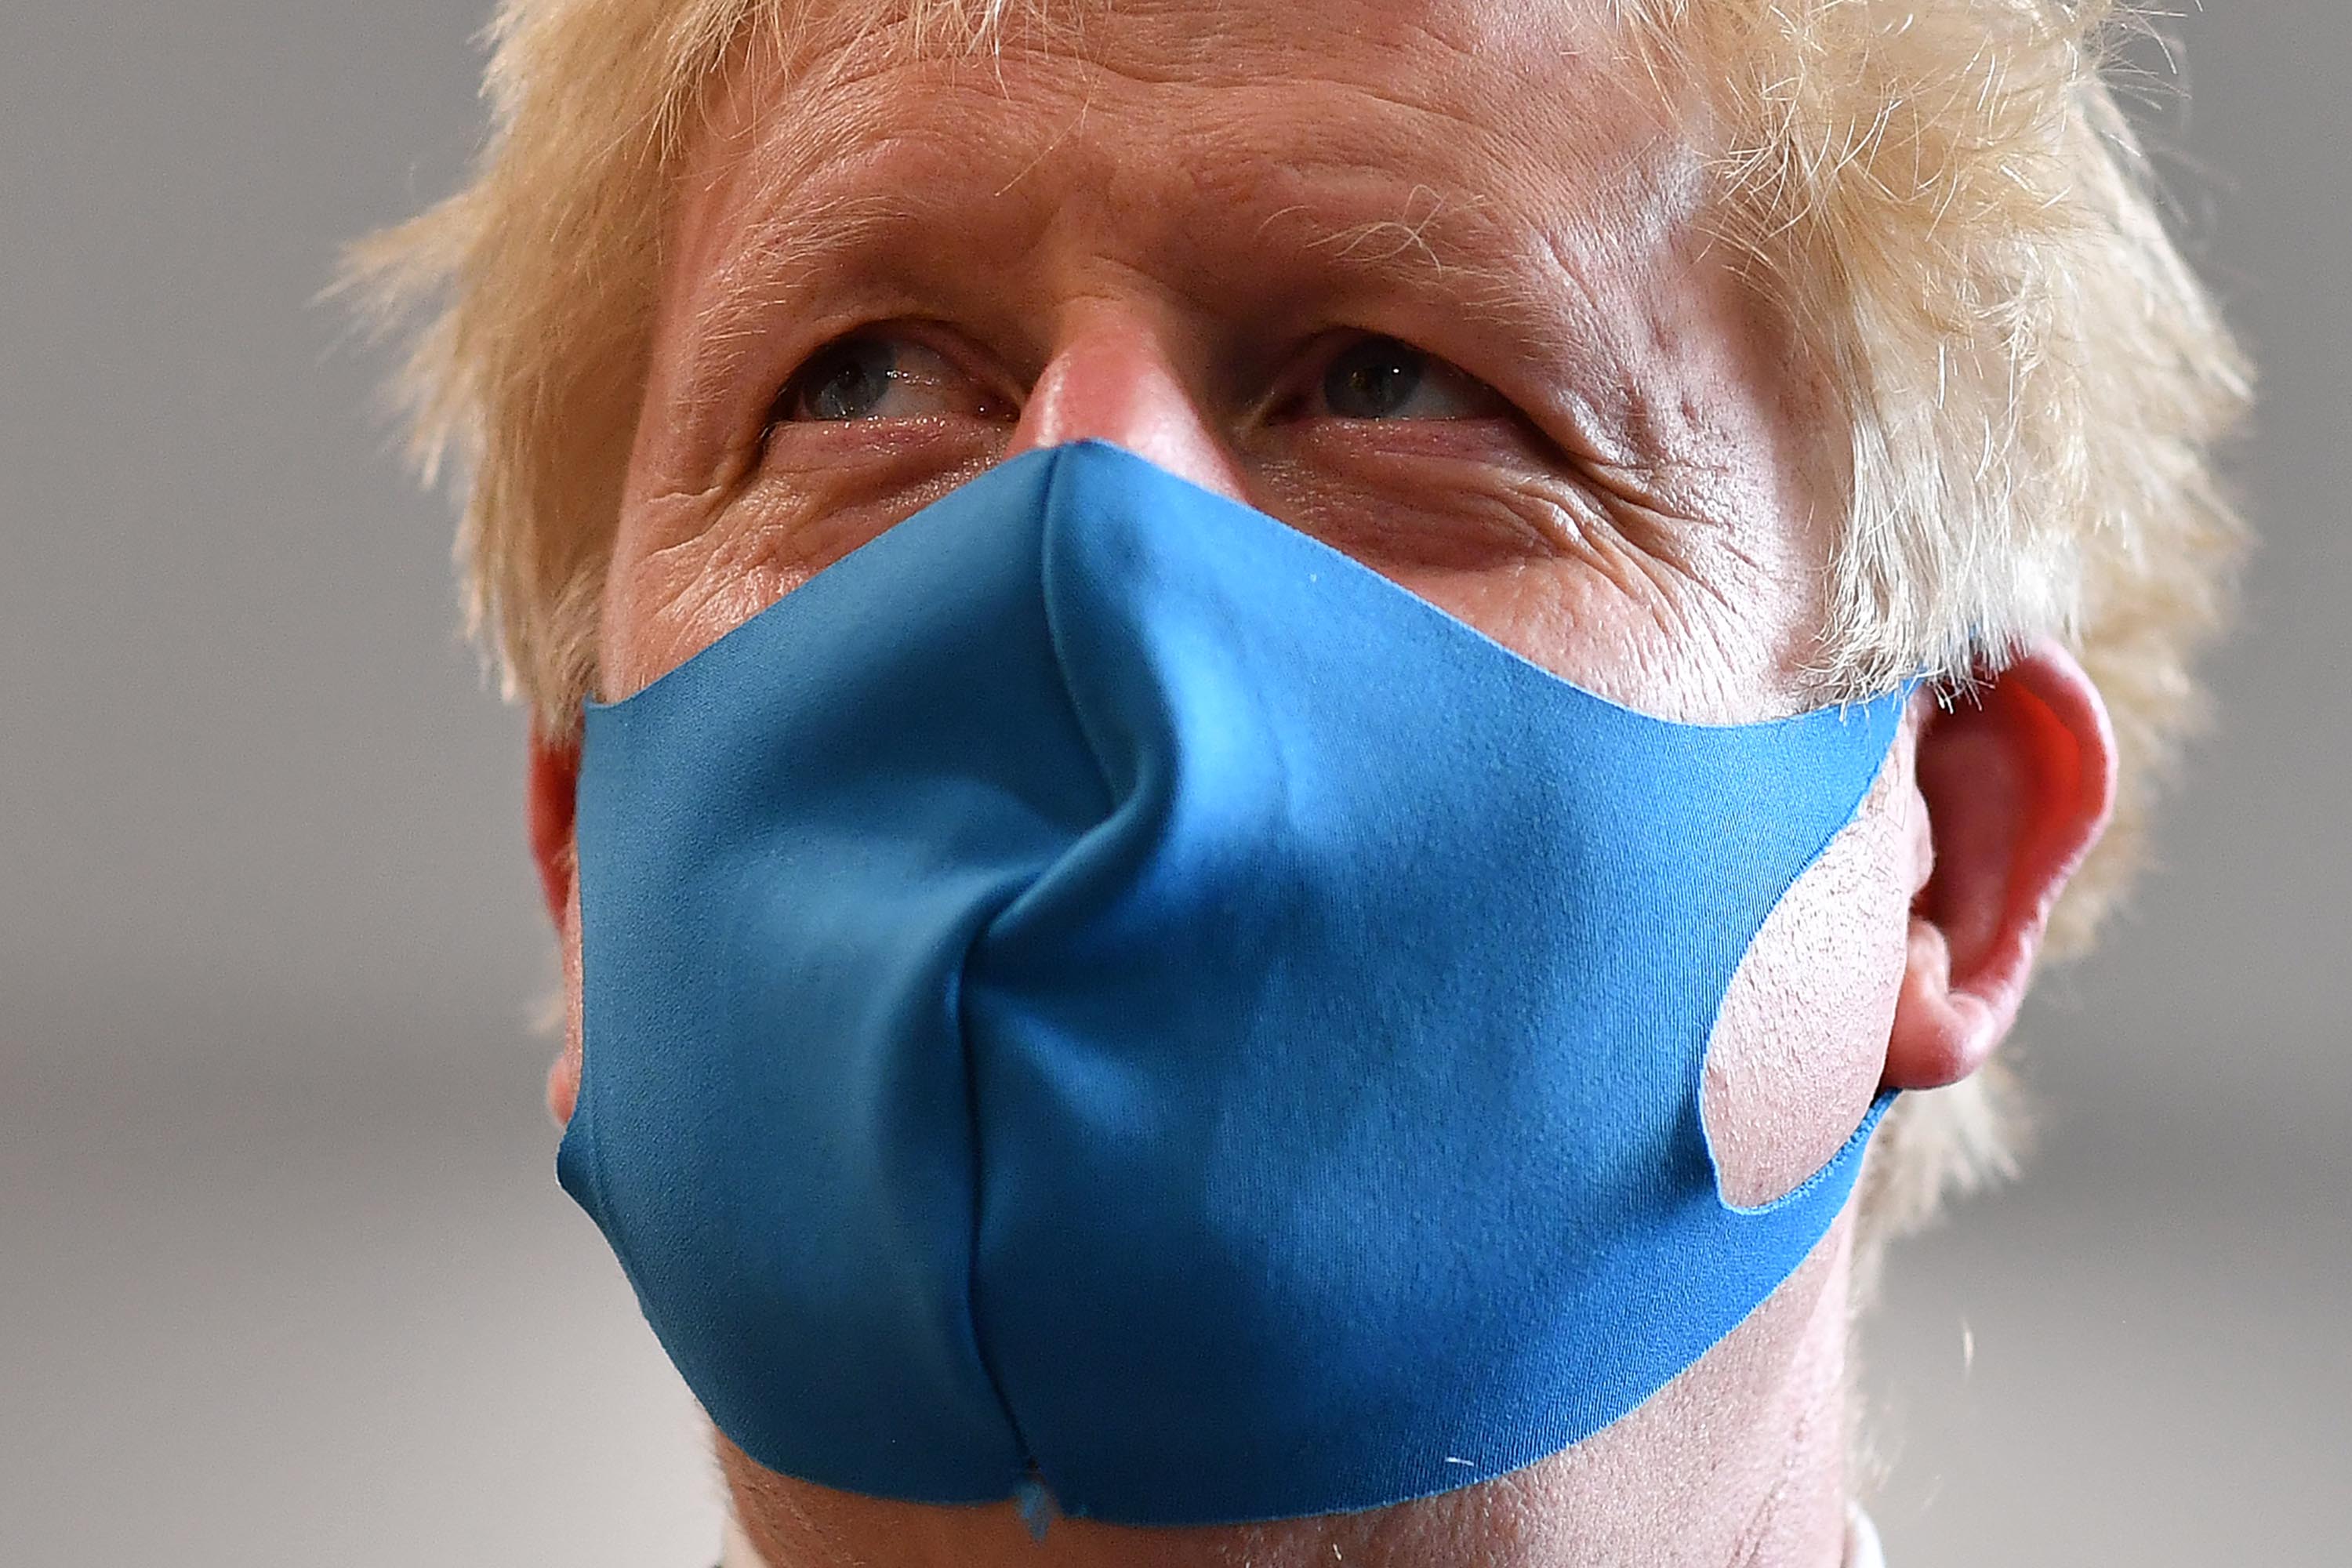 Britain's Prime Minister Boris Johnson wears a face mask while visiting the London Ambulance Service NHS Trust headquarters on July 13 in London, England.